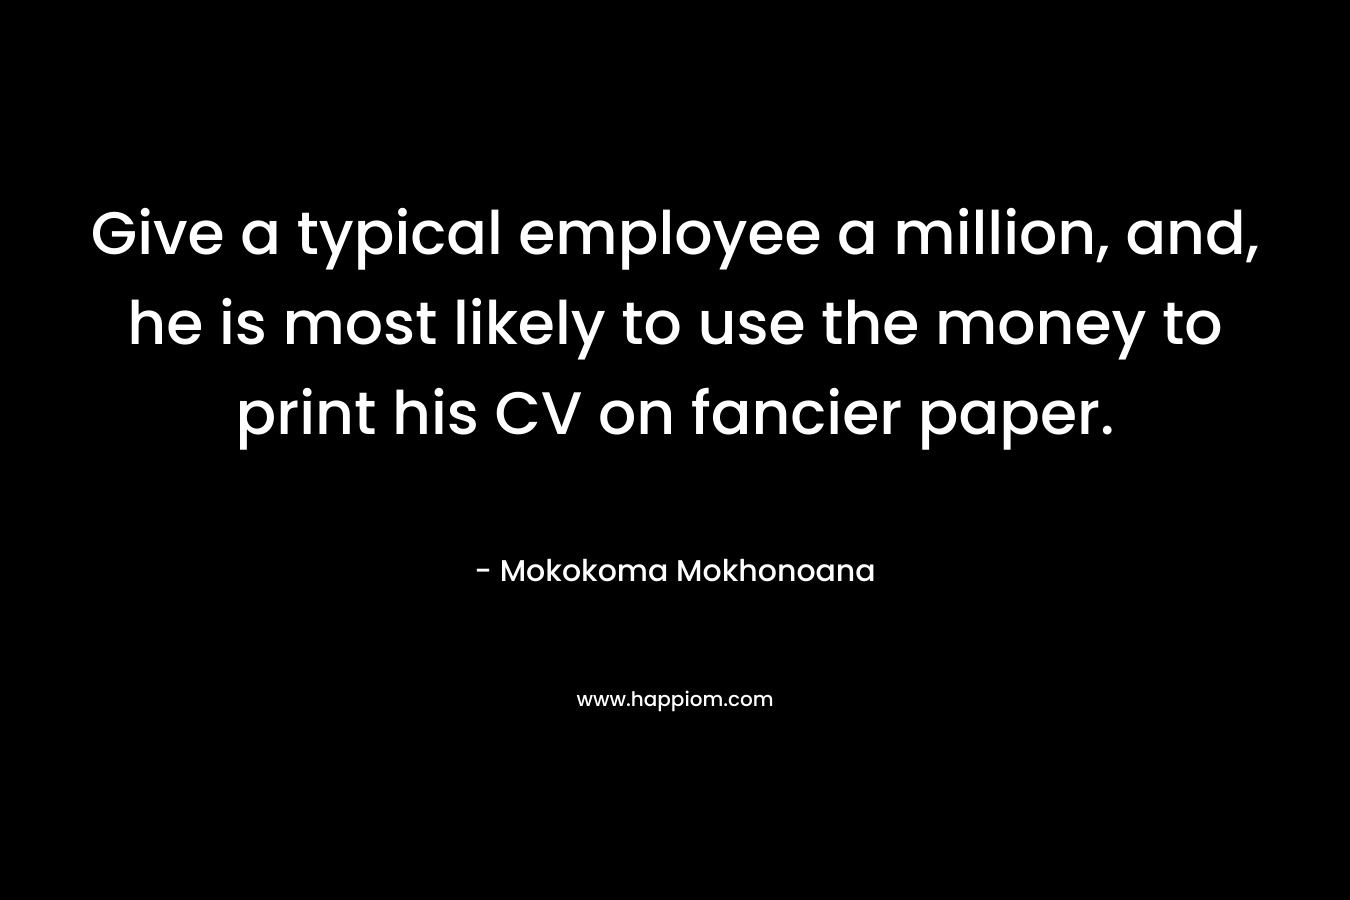 Give a typical employee a million, and, he is most likely to use the money to print his CV on fancier paper.